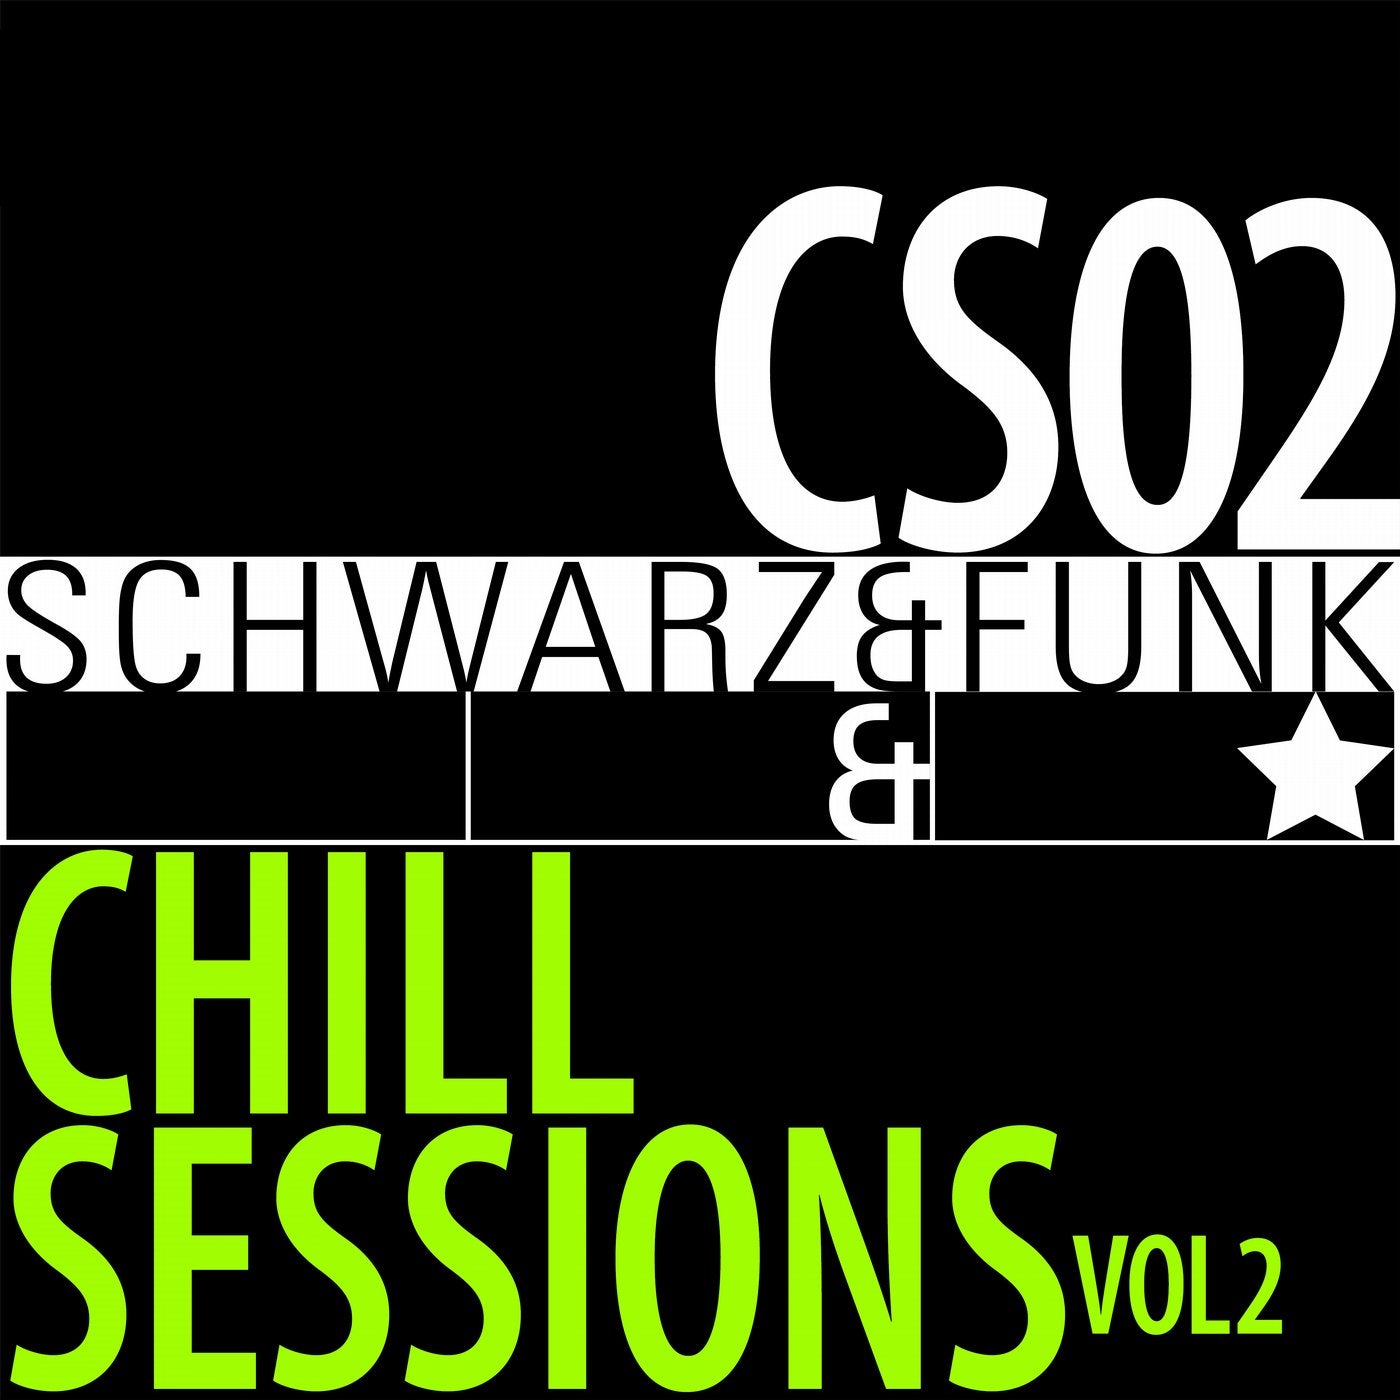 Chill Sessions, Vol. 2